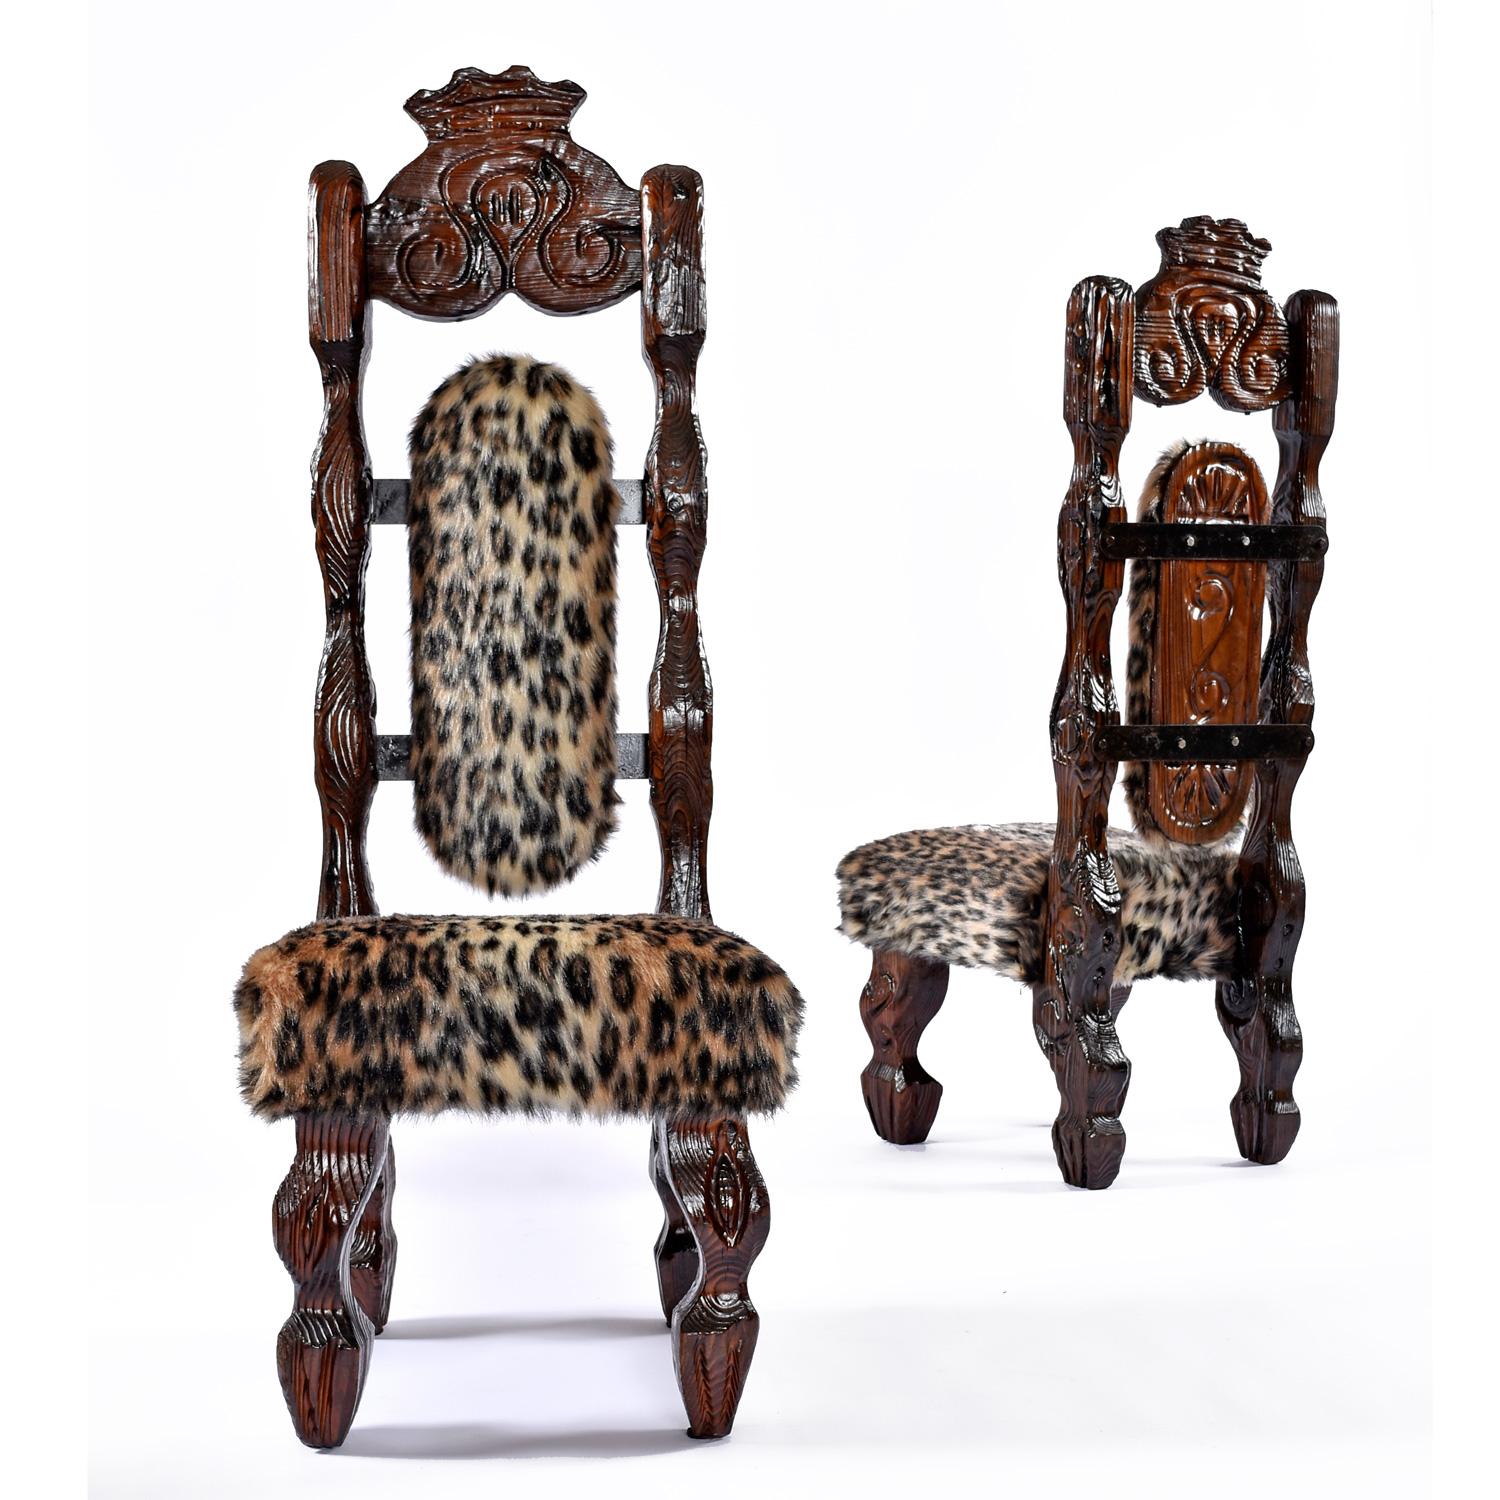 Take a walk on the wild side, or maybe just have a seat there with scepter in hand. Each chair has been recovered in high-quality, cruelty free, faux-fur that very much resembles the look and feel of leopard fur. Adorned top to bottom with